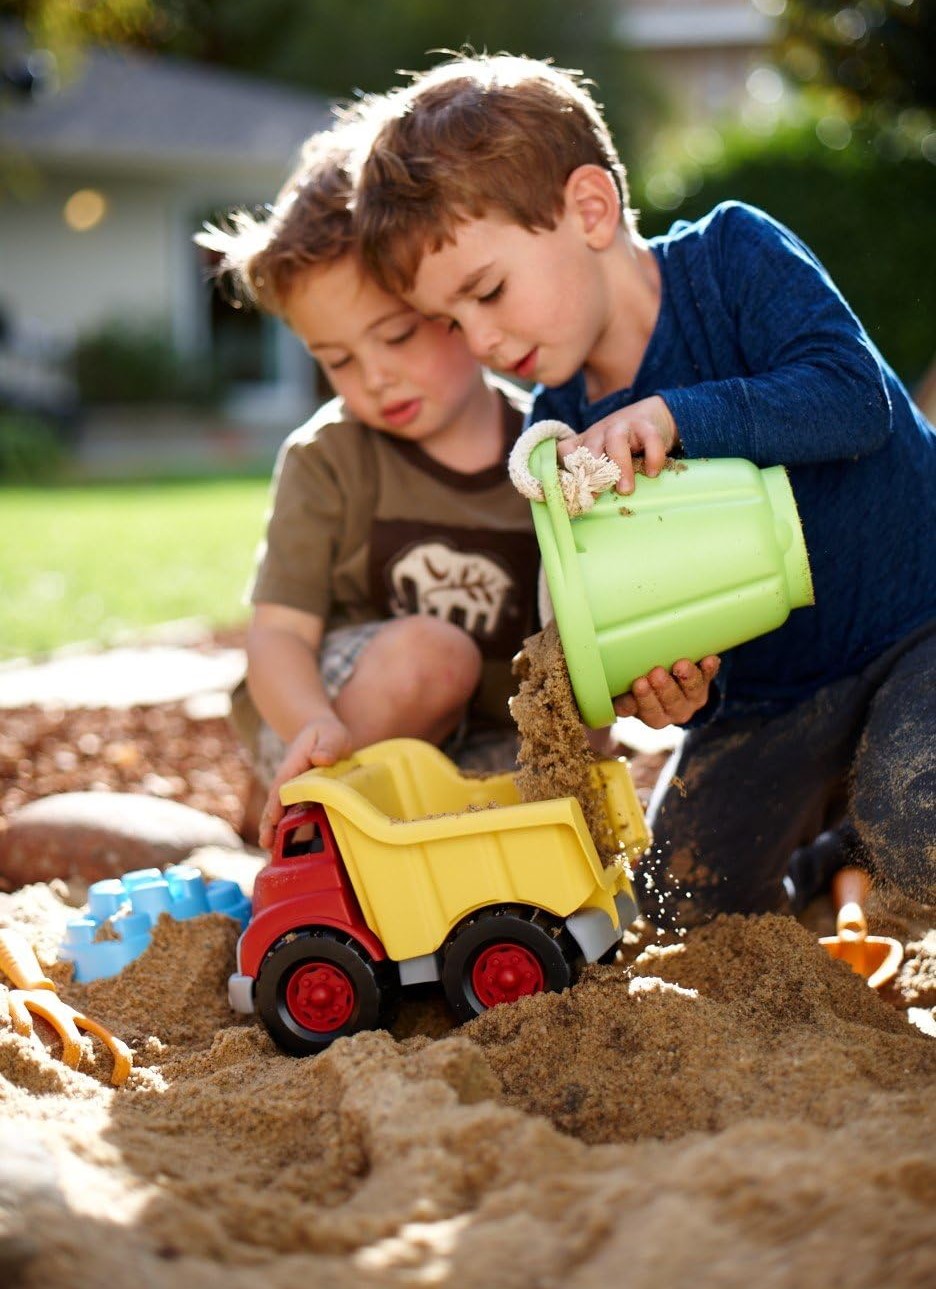 Two young boys are playing at dumping sand into colorful plastic dump truck - photo